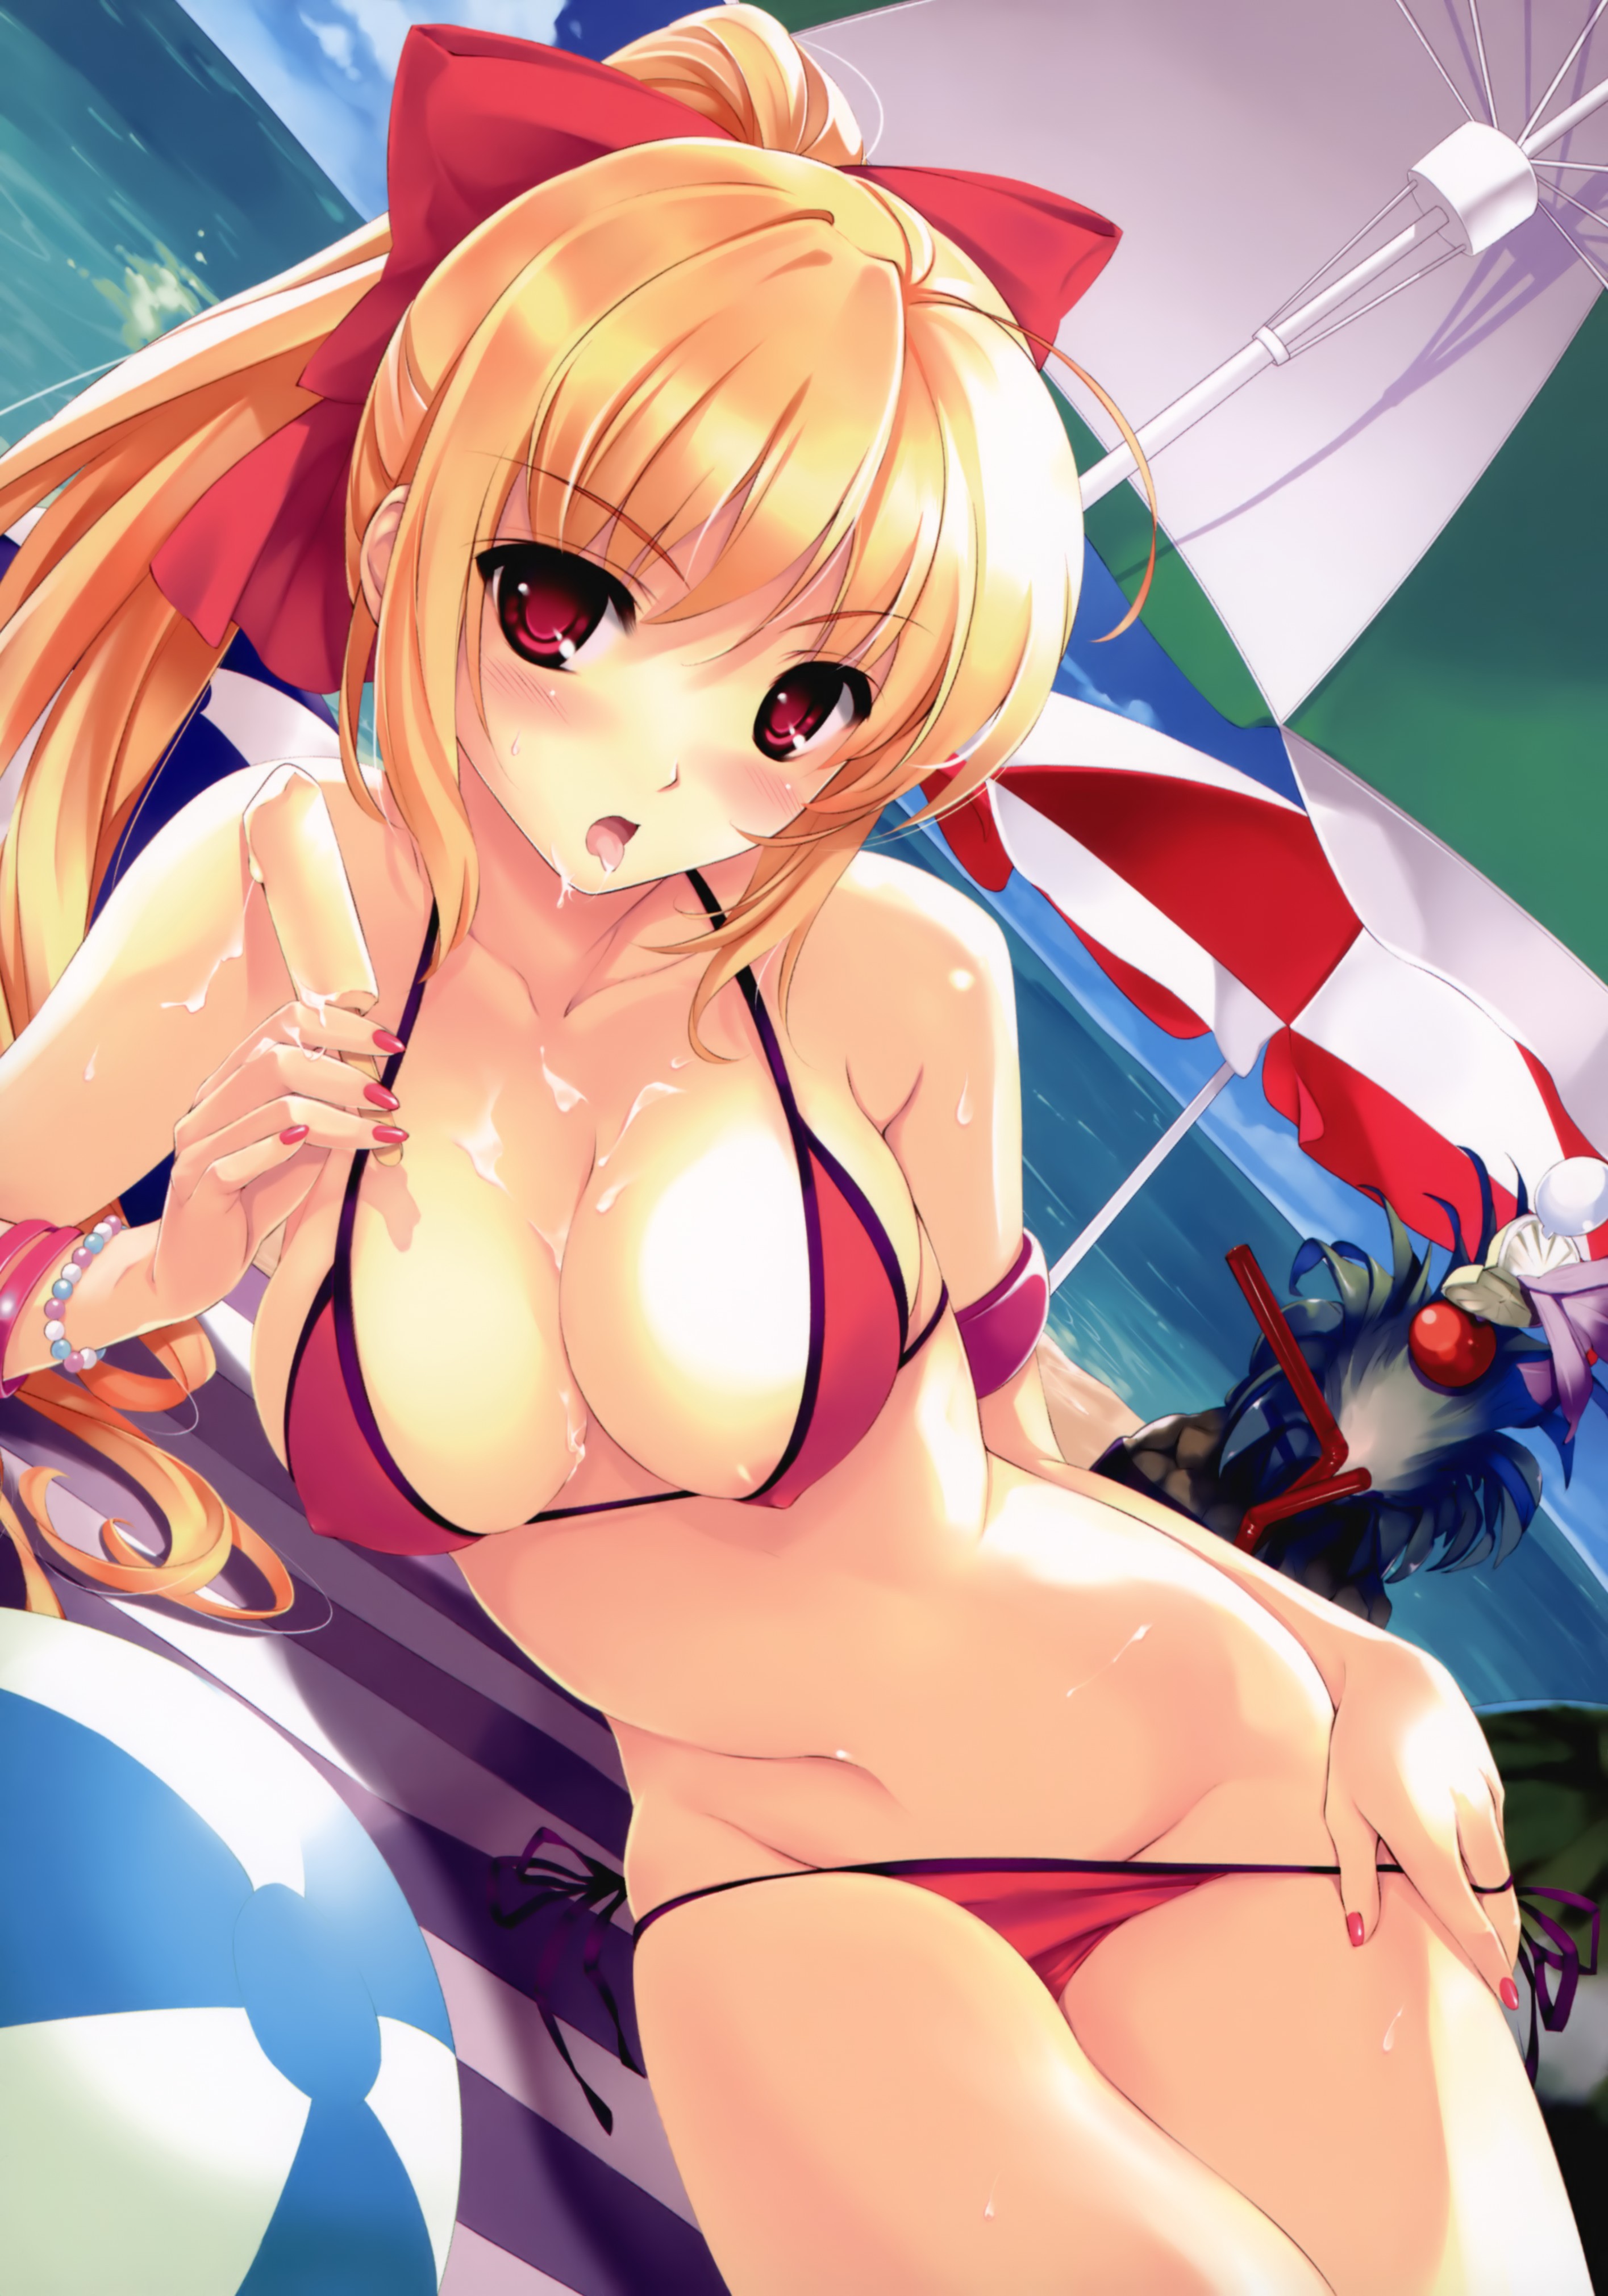 Anime 2830x4042 bikini beach wet body lying down wet clothing Misaki Kurehito ice cream cleavage Mizuhara Erika anime girls anime boobs belly red eyes food sweets popsicle looking at viewer red nails painted nails women on beach parasol nipples through clothing undressing tongue out